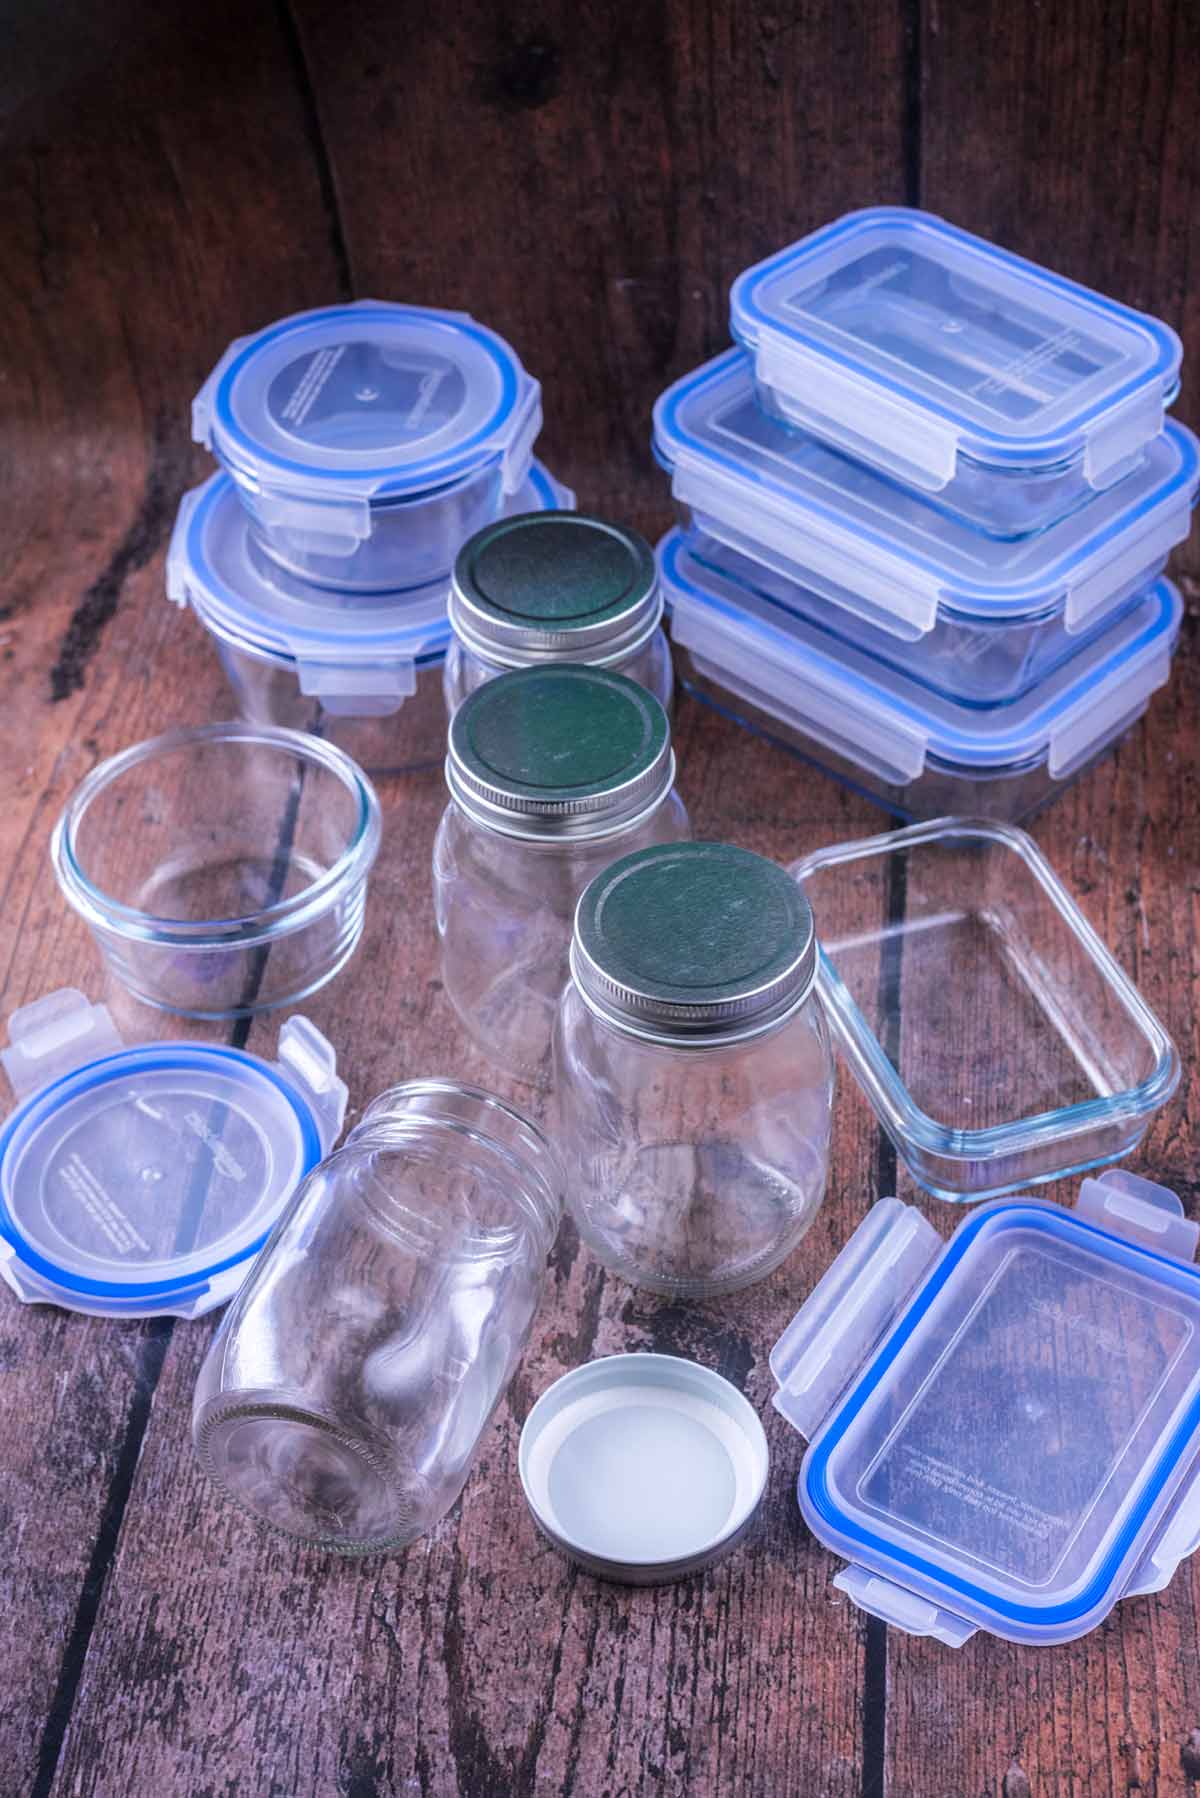 Glass storage containers and glass jars on a wooden surface.